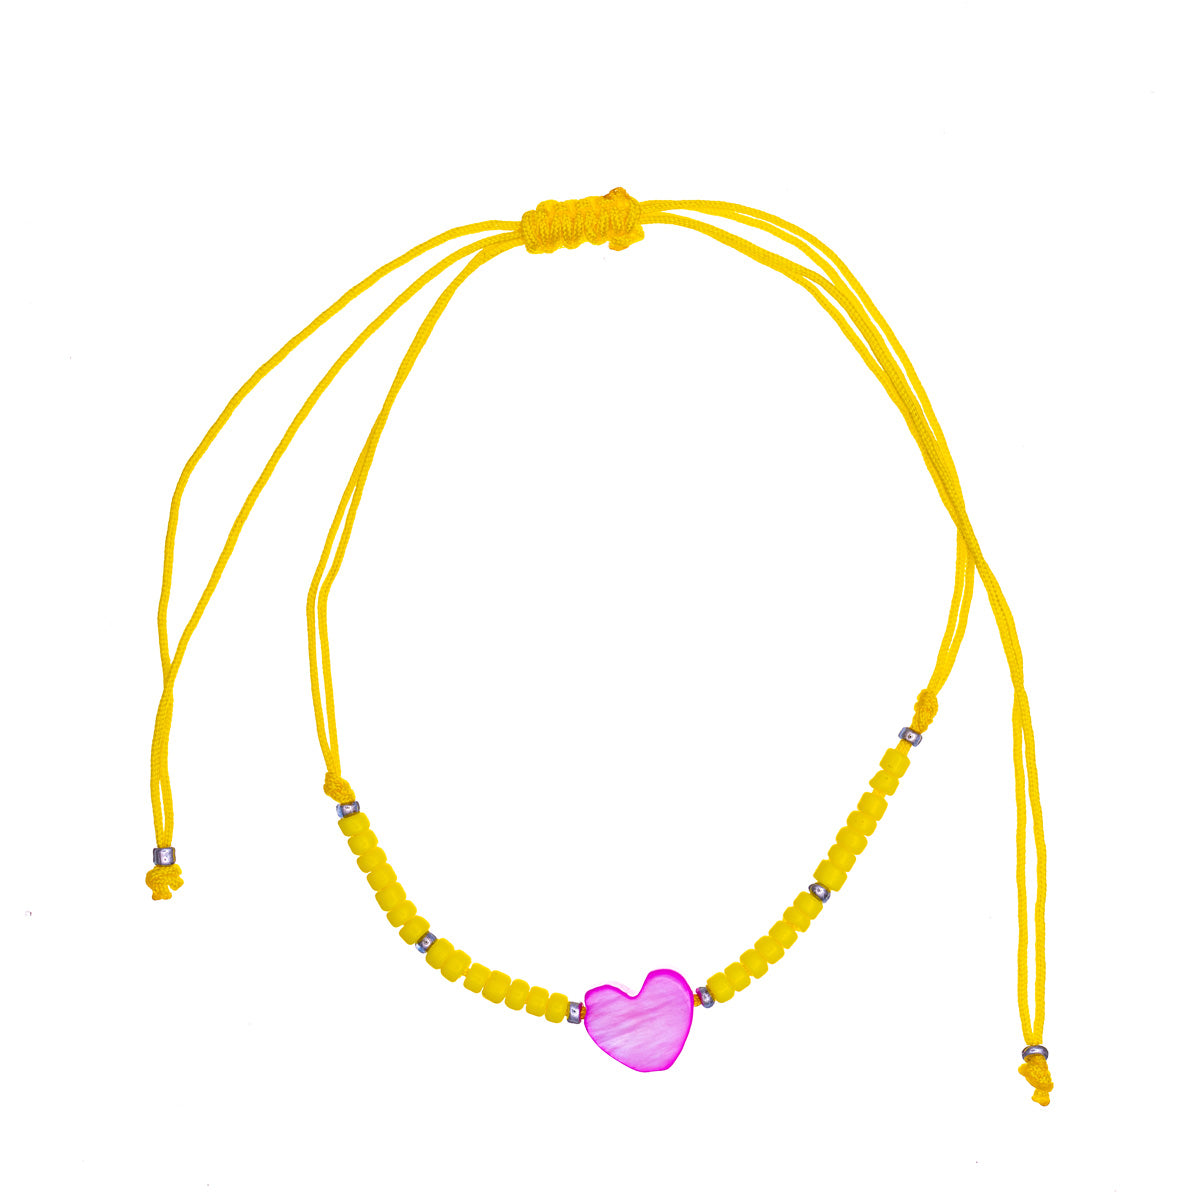 Colourful heart bracelet with beads